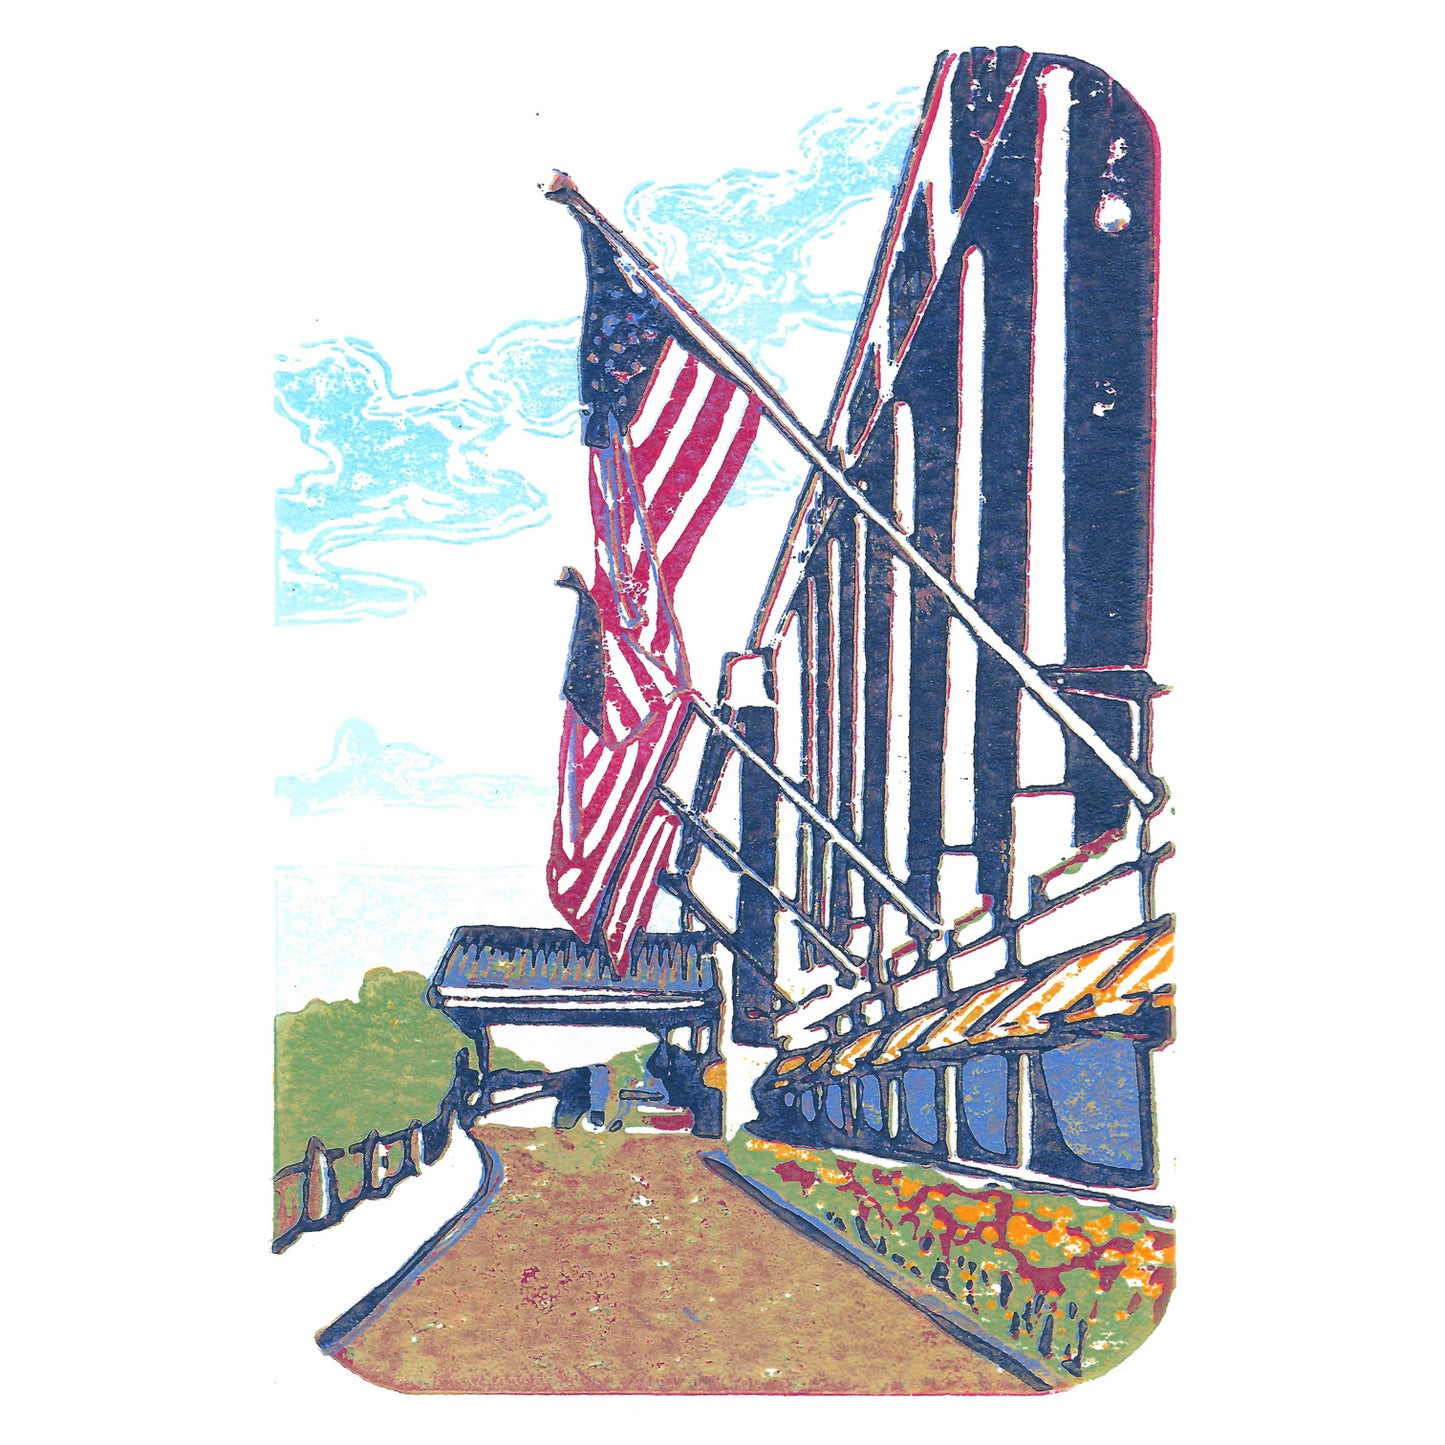 Mackinac Island art featuring American flags at the Grand Hotel by printmaker Natalia Wohletz of Peninsula Prints titled Grand Flags.